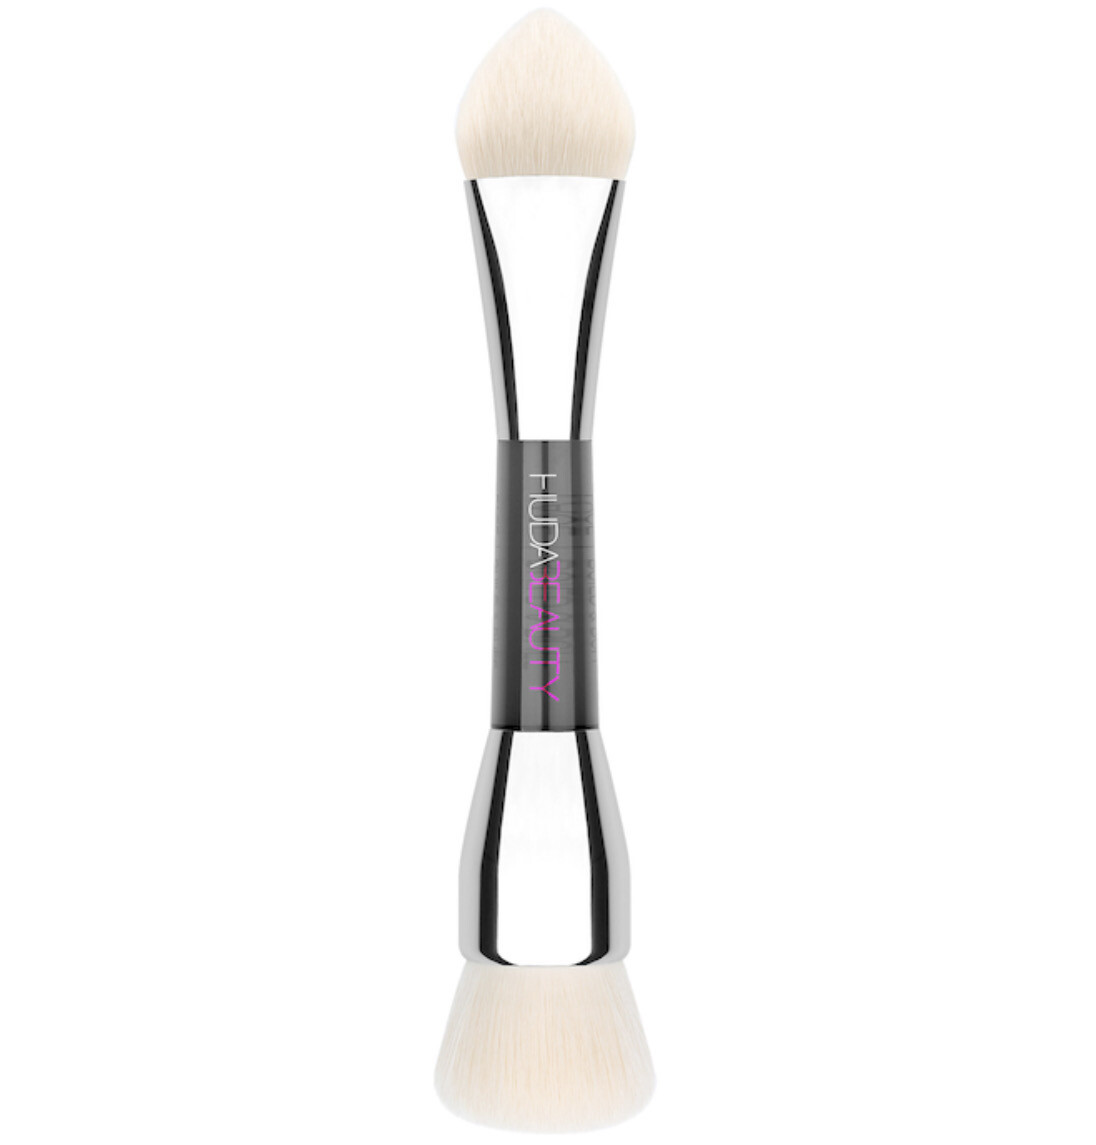 Huda Beauty - Build and Buff Double Ended Foundation Brush